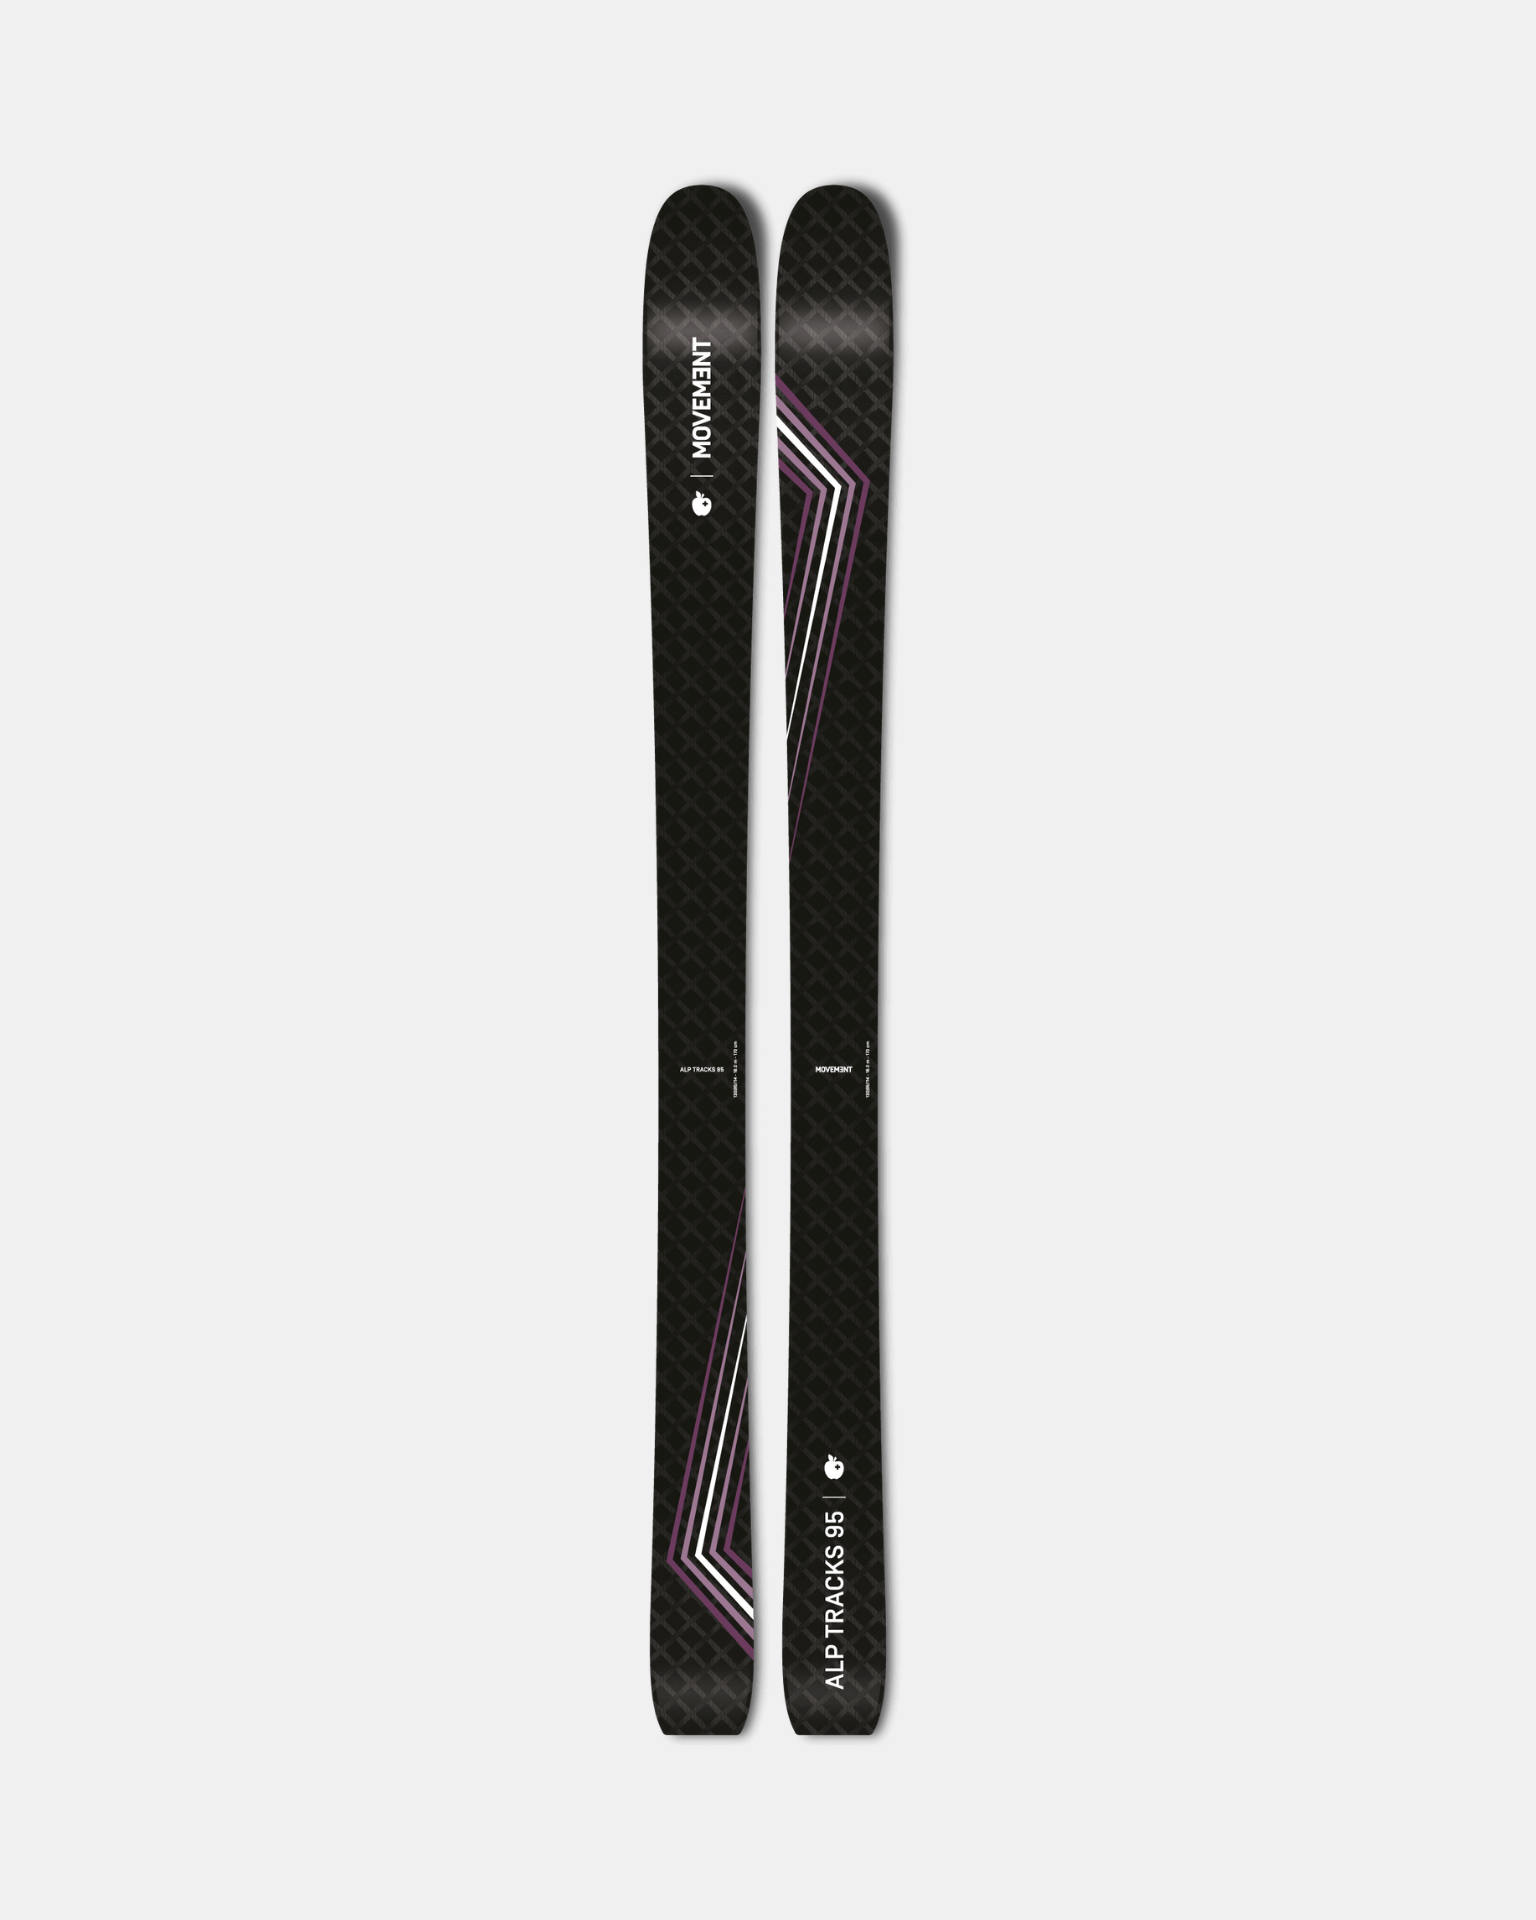 Embrace the mountains with my trusted companions, Movement&#39;s Alp Tracks 95 Women&#39;s skis.